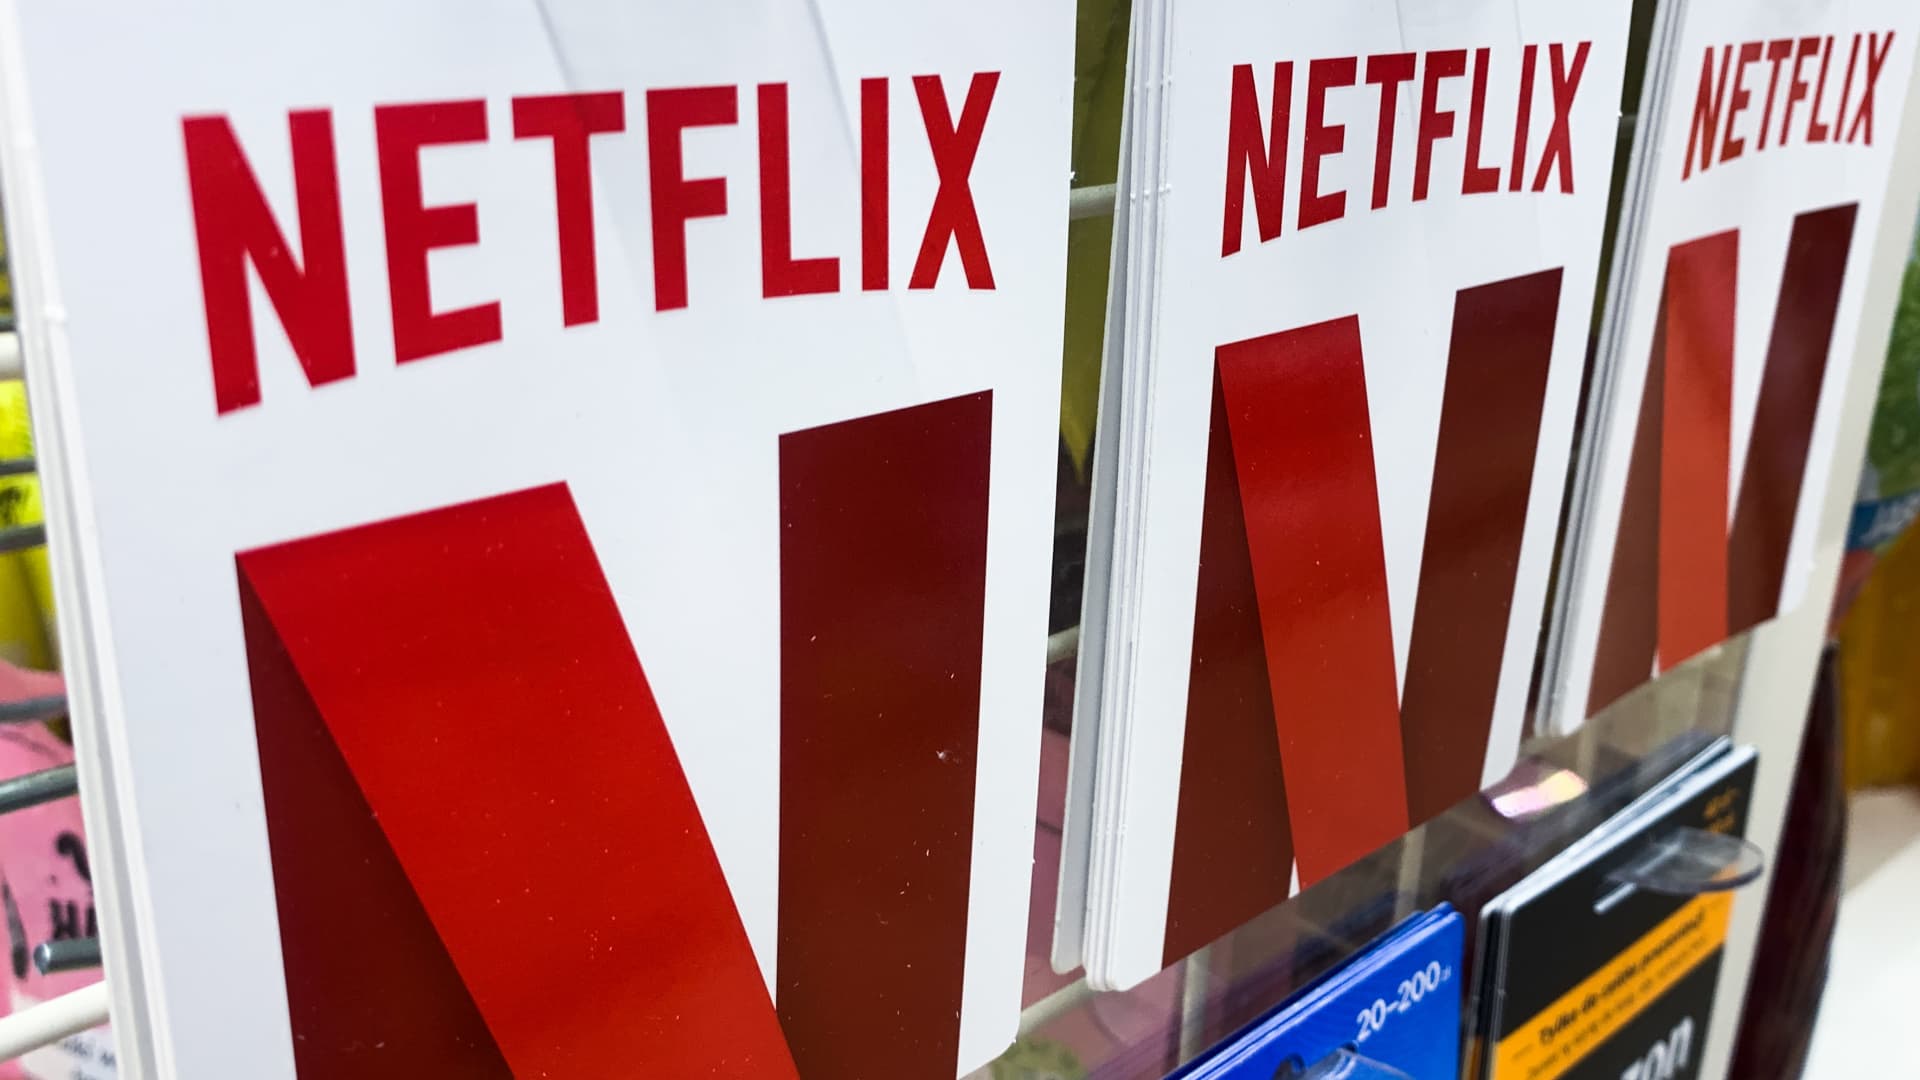 Netflix says it’s opening a video game studio in Finland